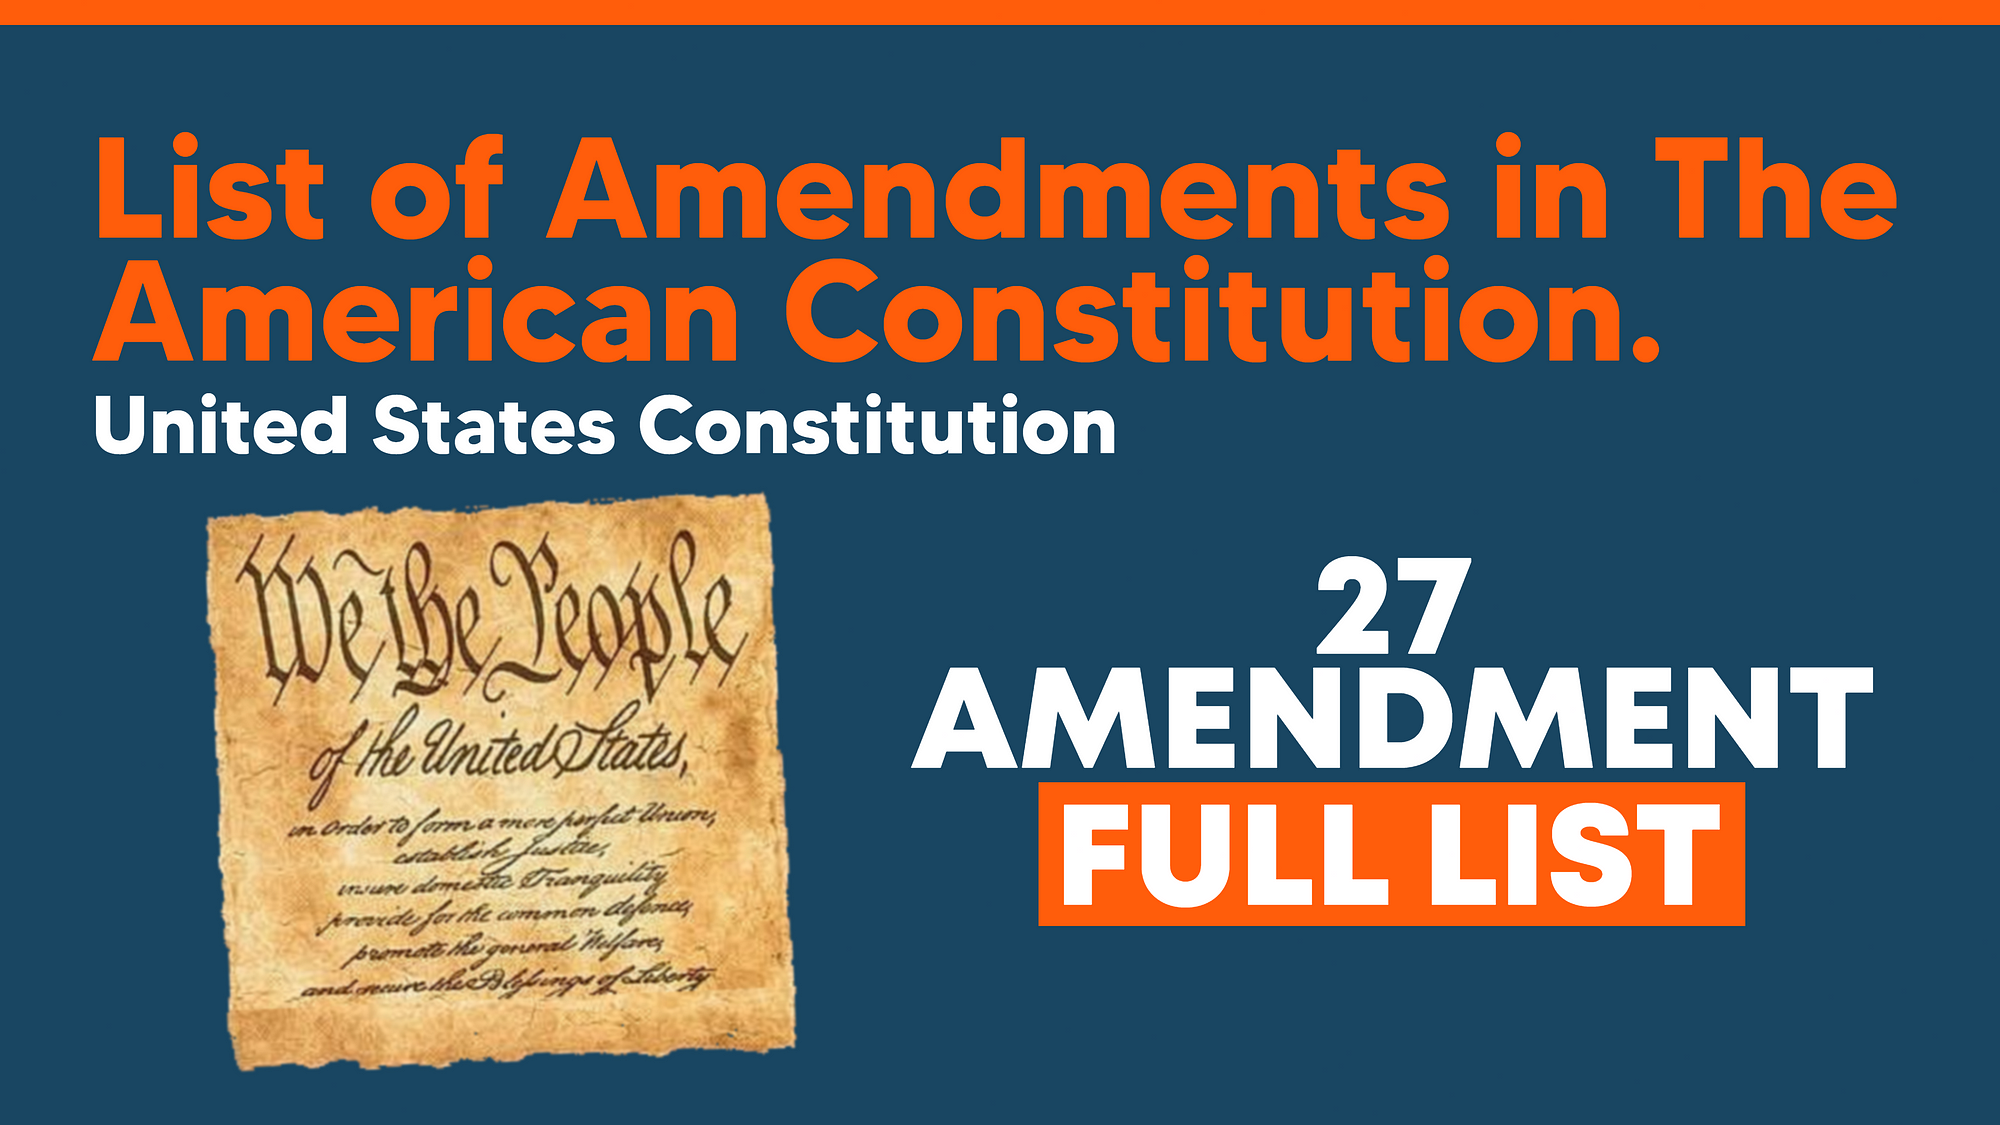 The 27 Amendments to the Constitution in Pictures